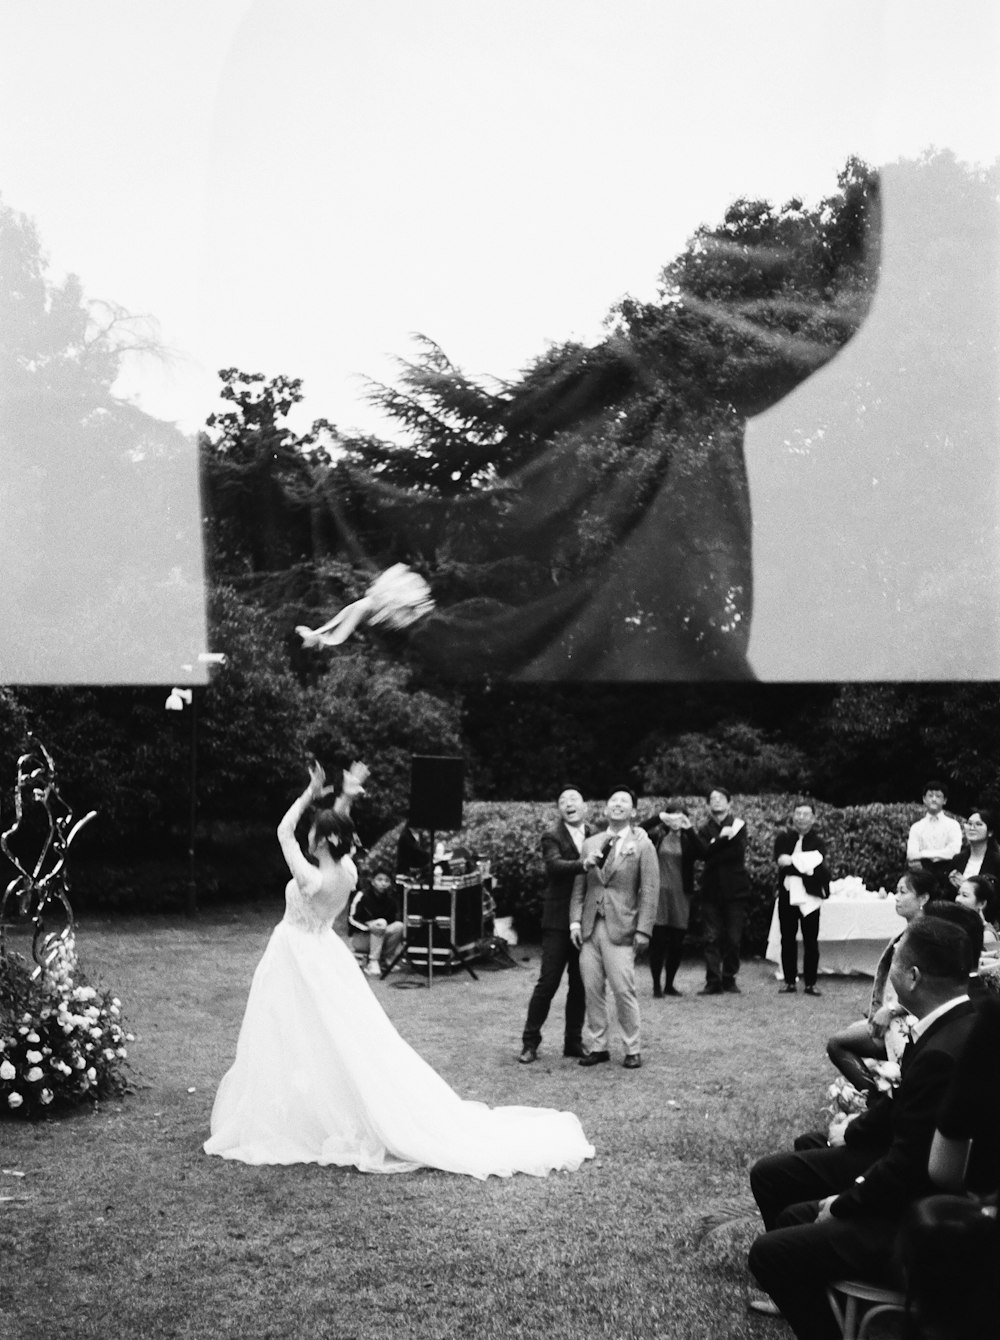 grayscale photo of people in a wedding